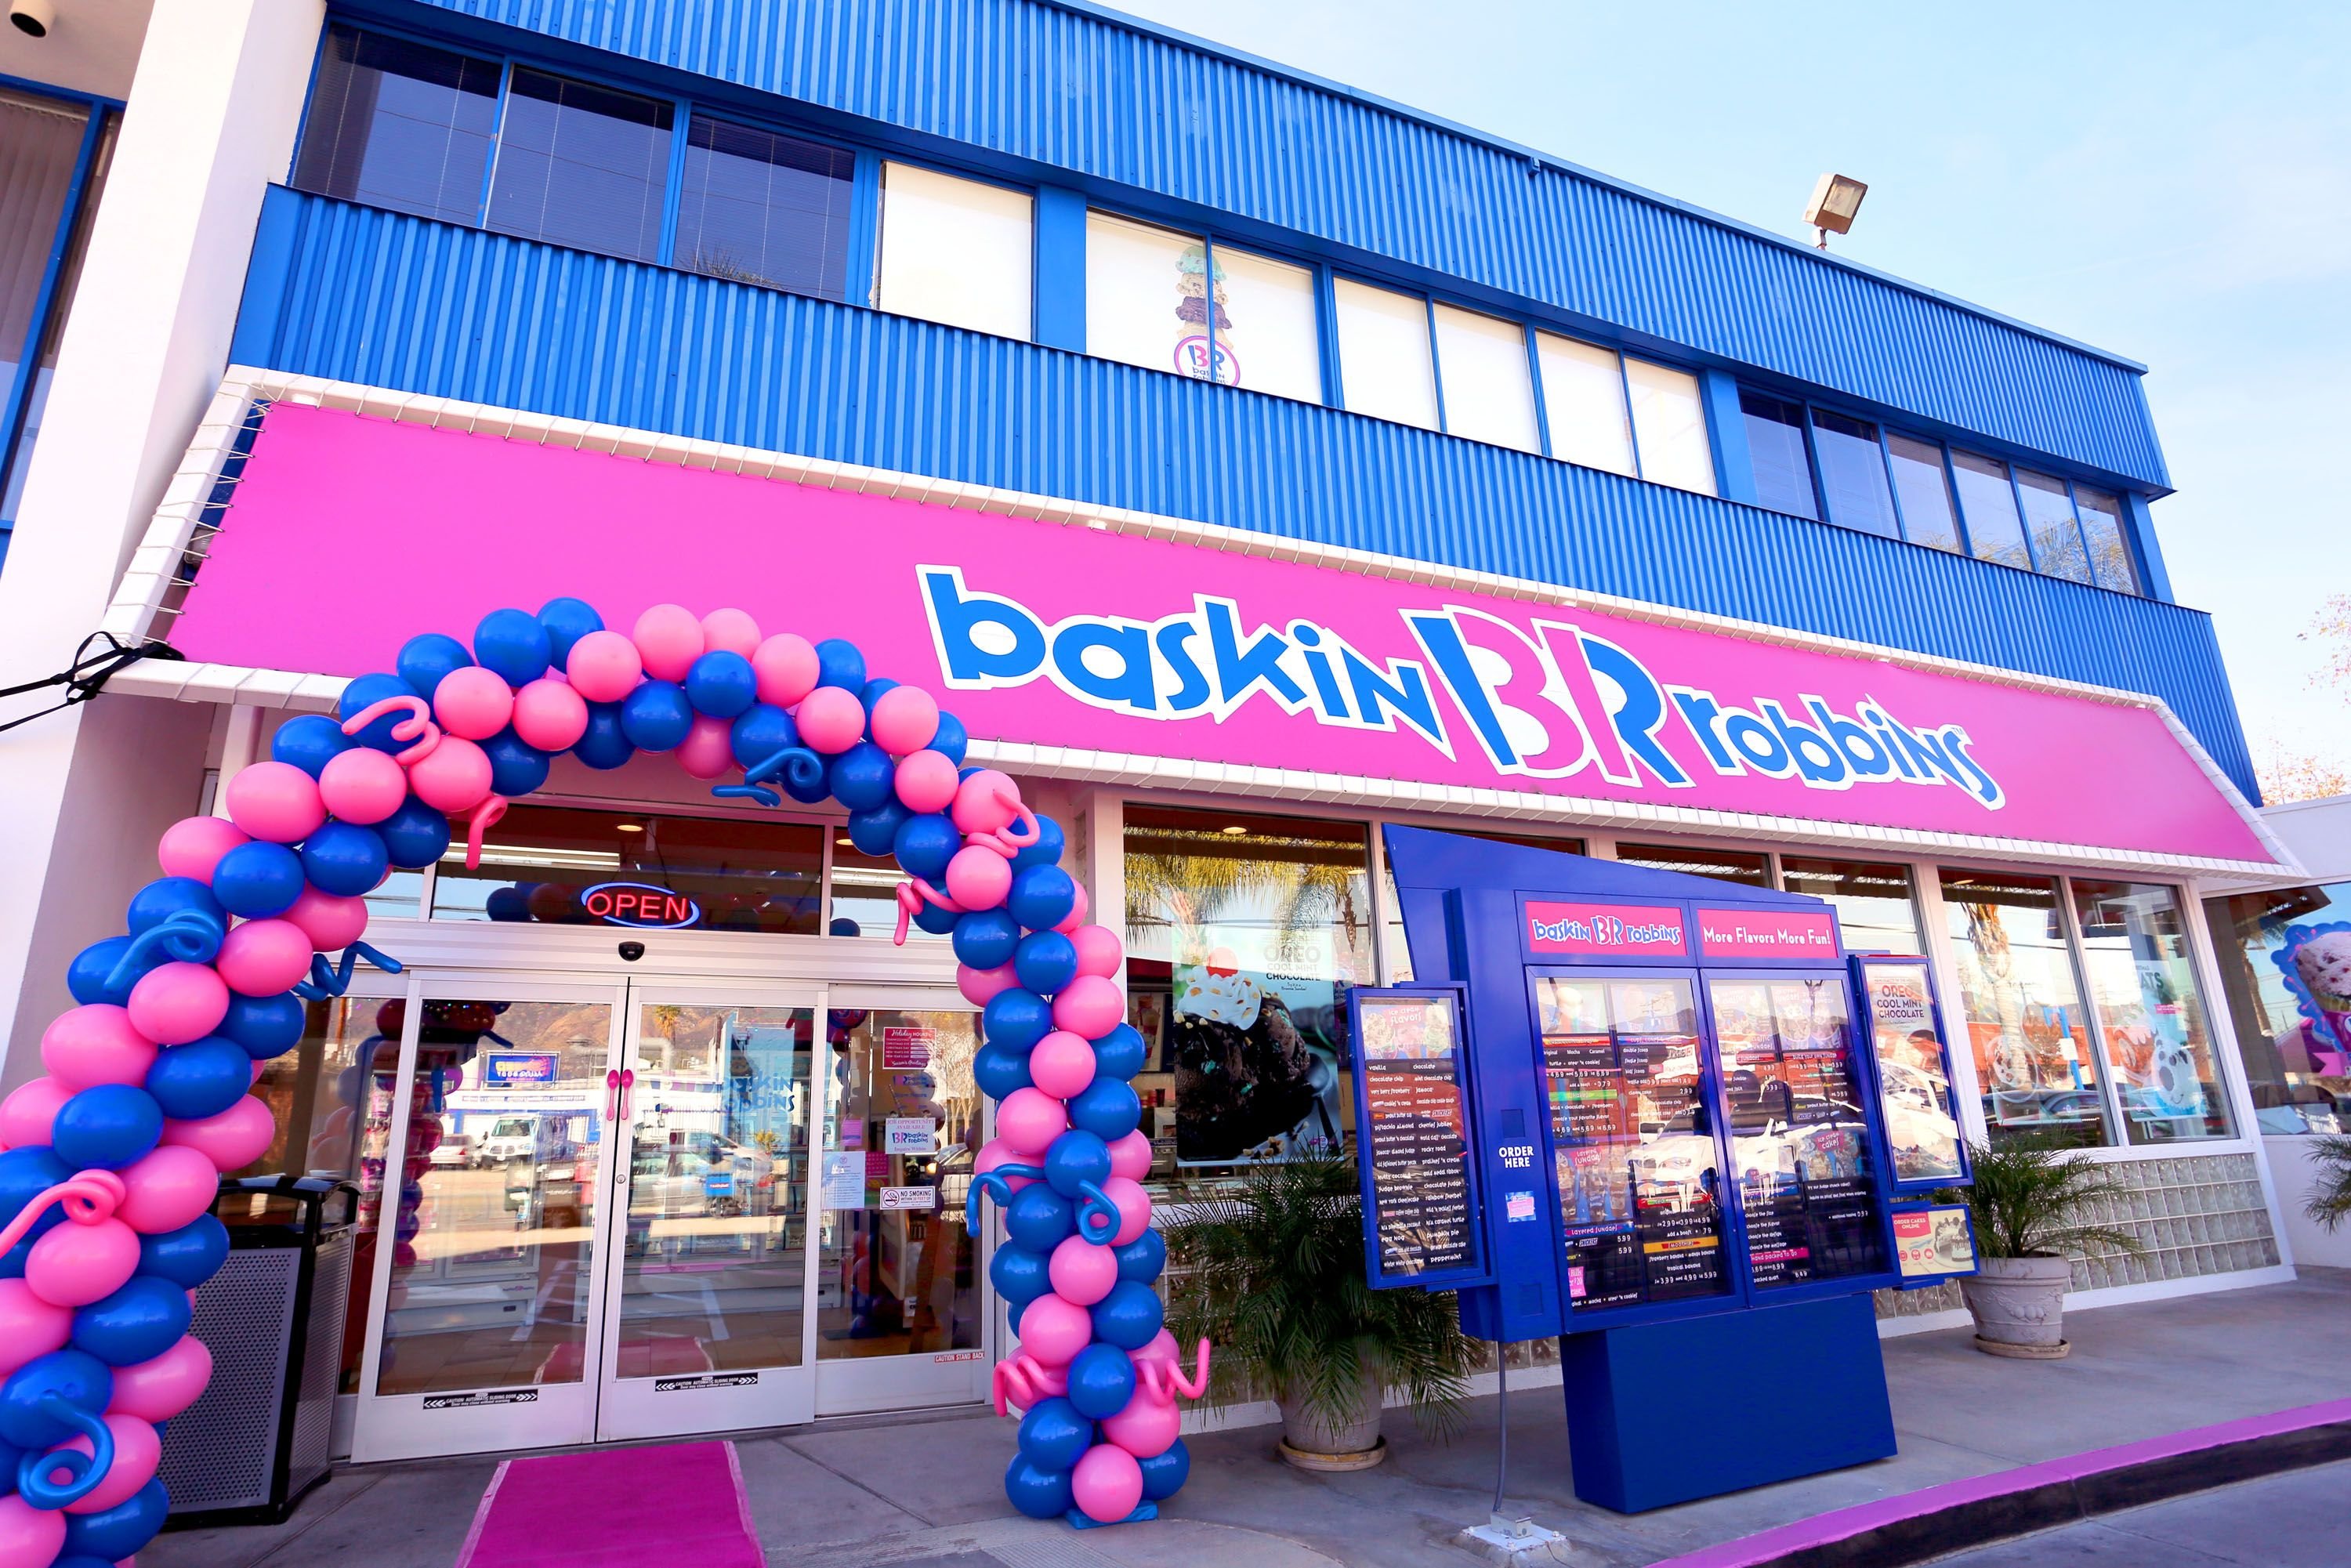 BASKIN ROBBINS FRANCHISE IN INDIA – COMPLETE GUIDE 